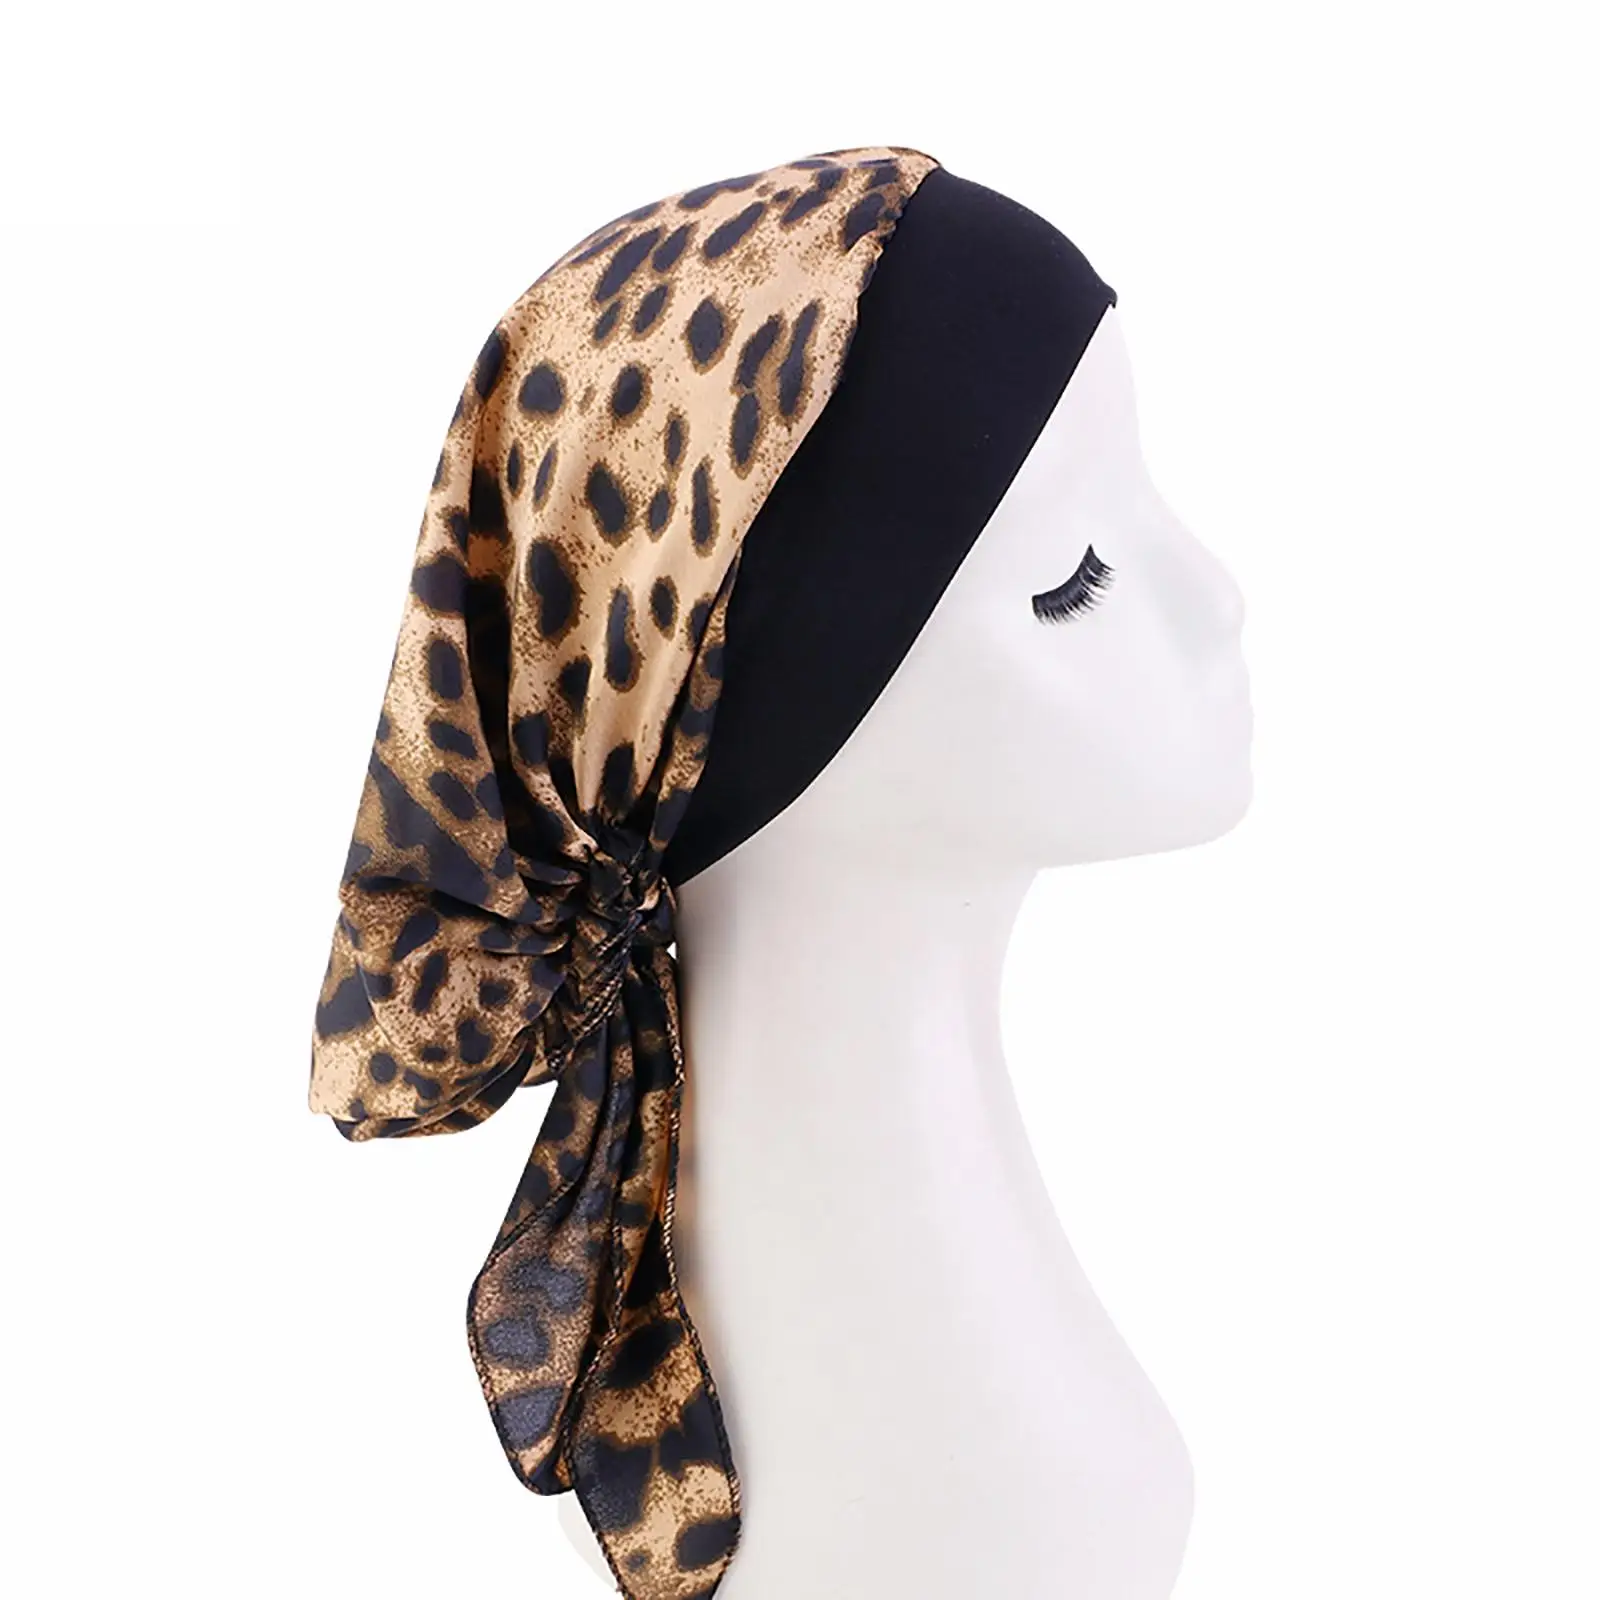 Multifunction Women Hat Printed Headscarf Soft  Loss Cancer Chemo Women